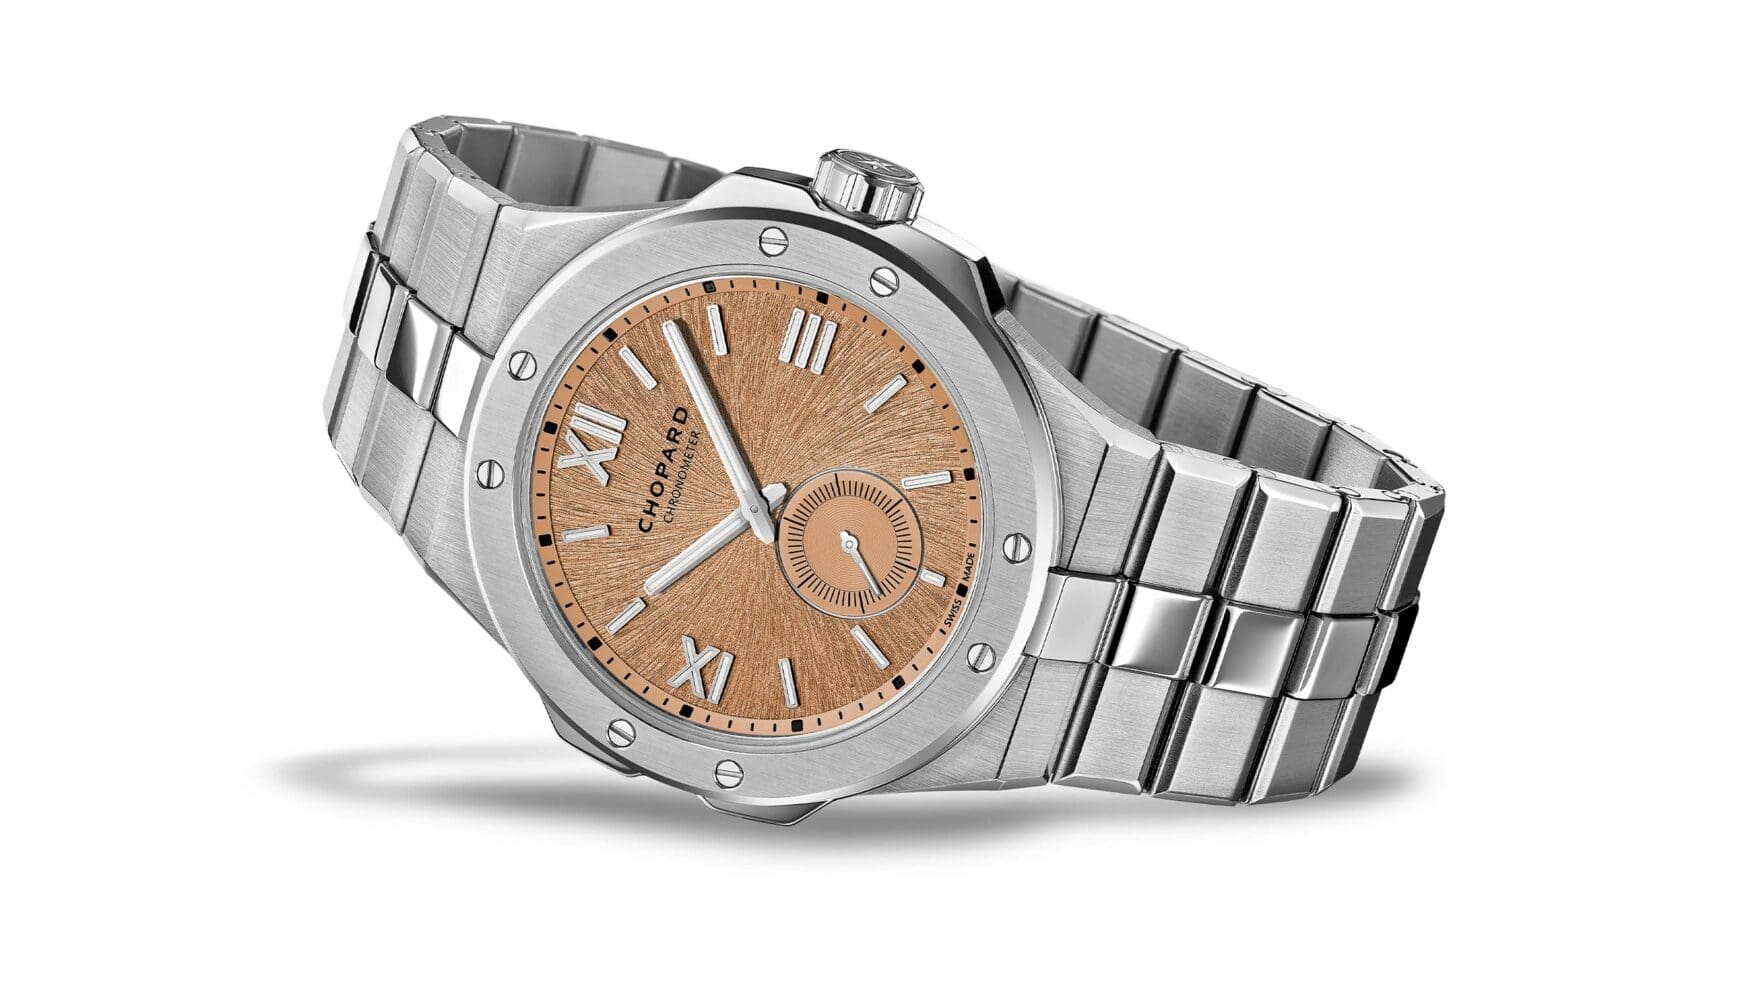 The Chopard Alpine Eagle 41 XPS is an ultra-thin, luxe take on a sporty proposition